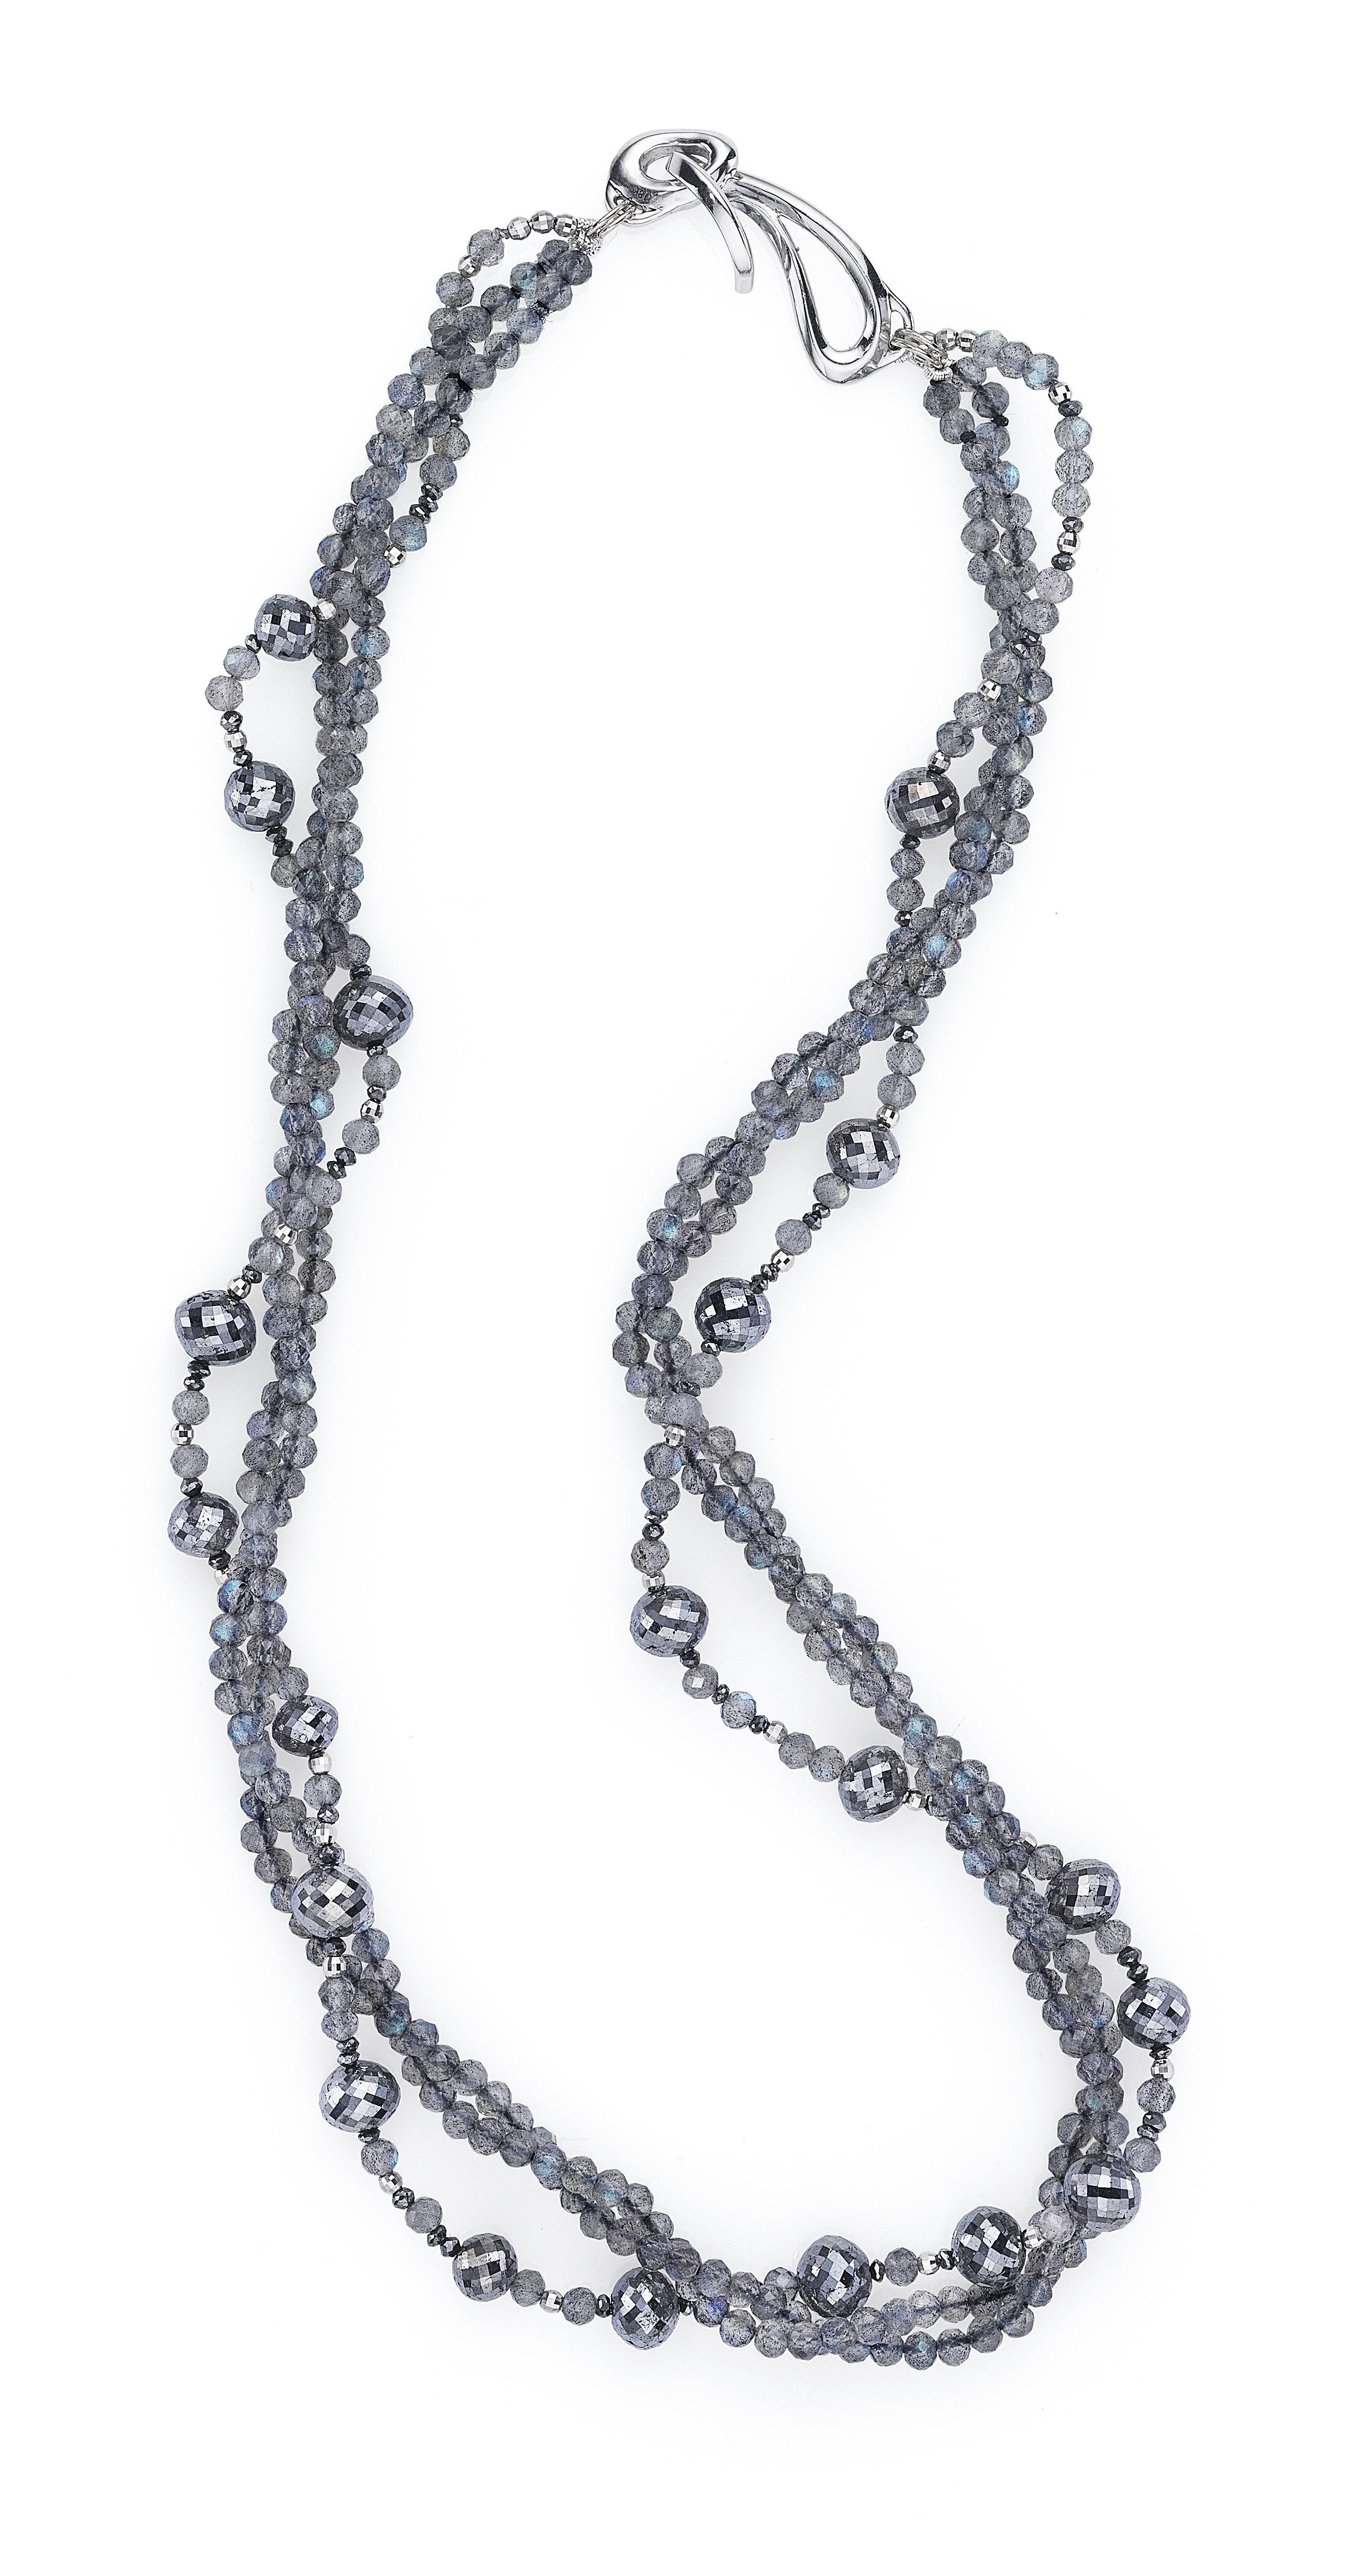 Gorgeous scintillating labradorite and 45 cts of black diamond beads strung with 14K mirrored white gold spacers. Finished with Sarna's signature clasp in 18K white gold. 

Labradorite beads: 3 mm
Large black diamond beads: 5.5-7 mm
Small black